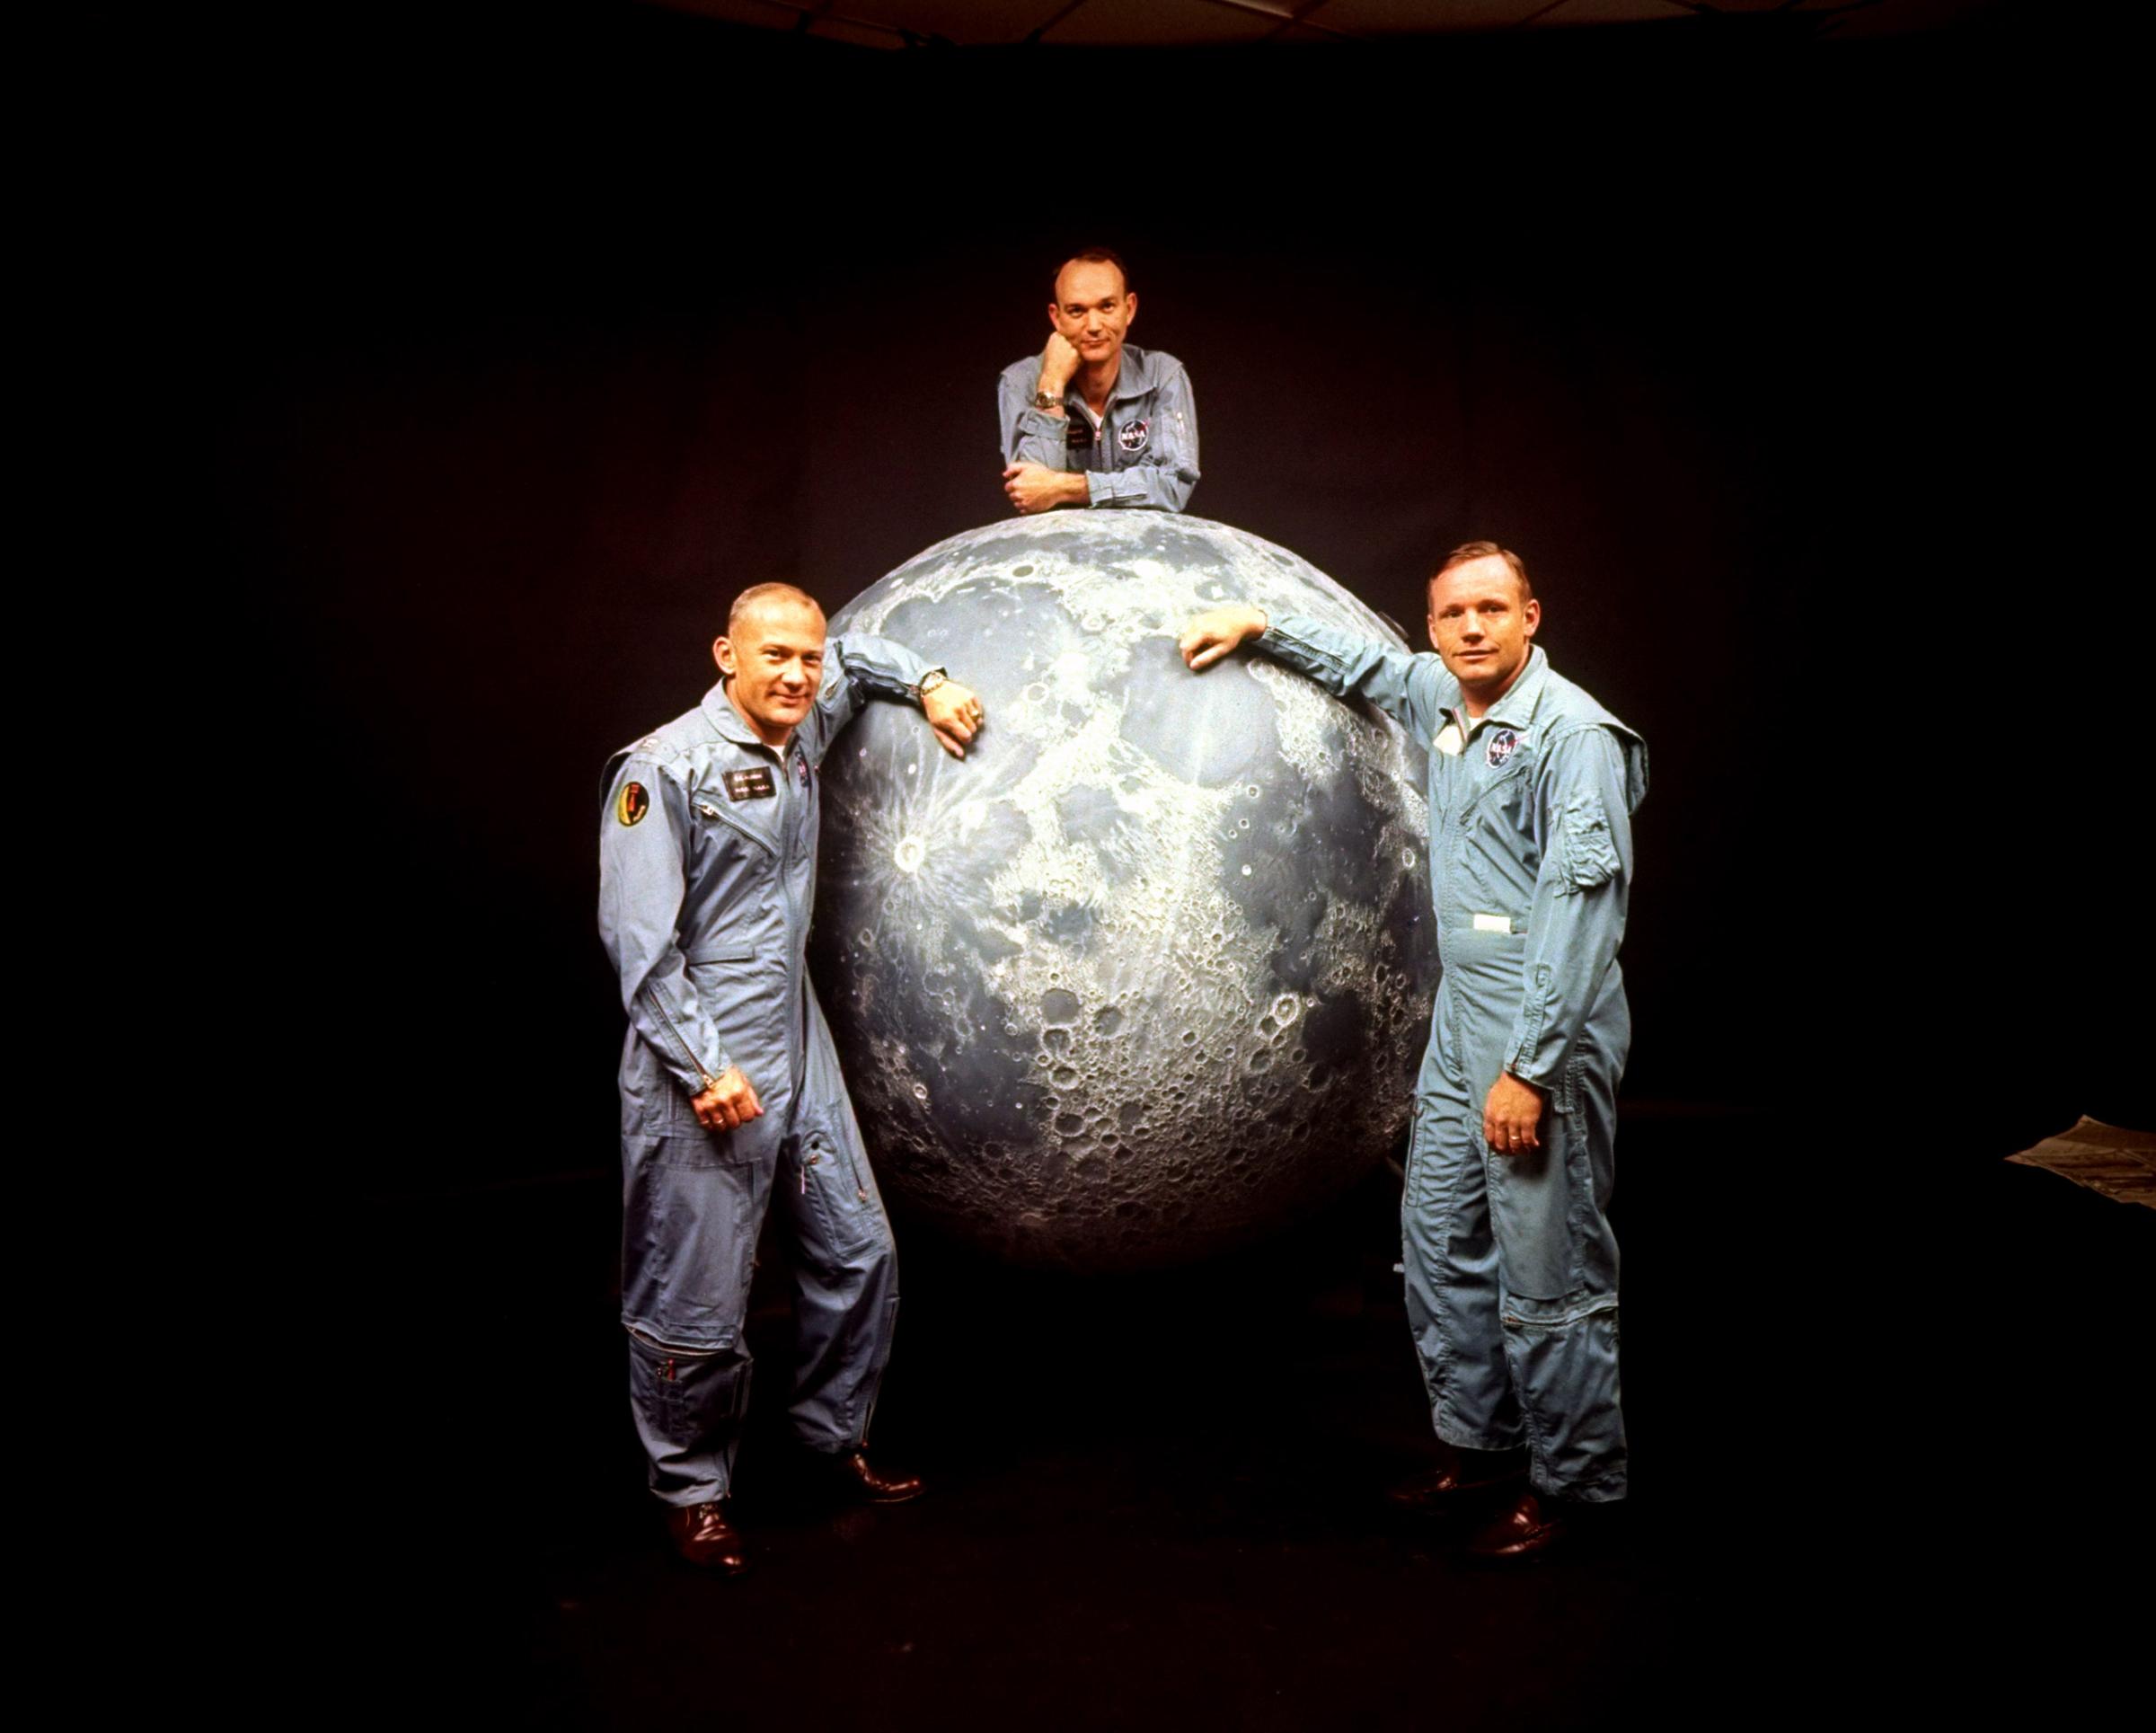 Apollo astronauts (L-R) Buzz Aldrin, Michael Collins and Neil Armstrong.